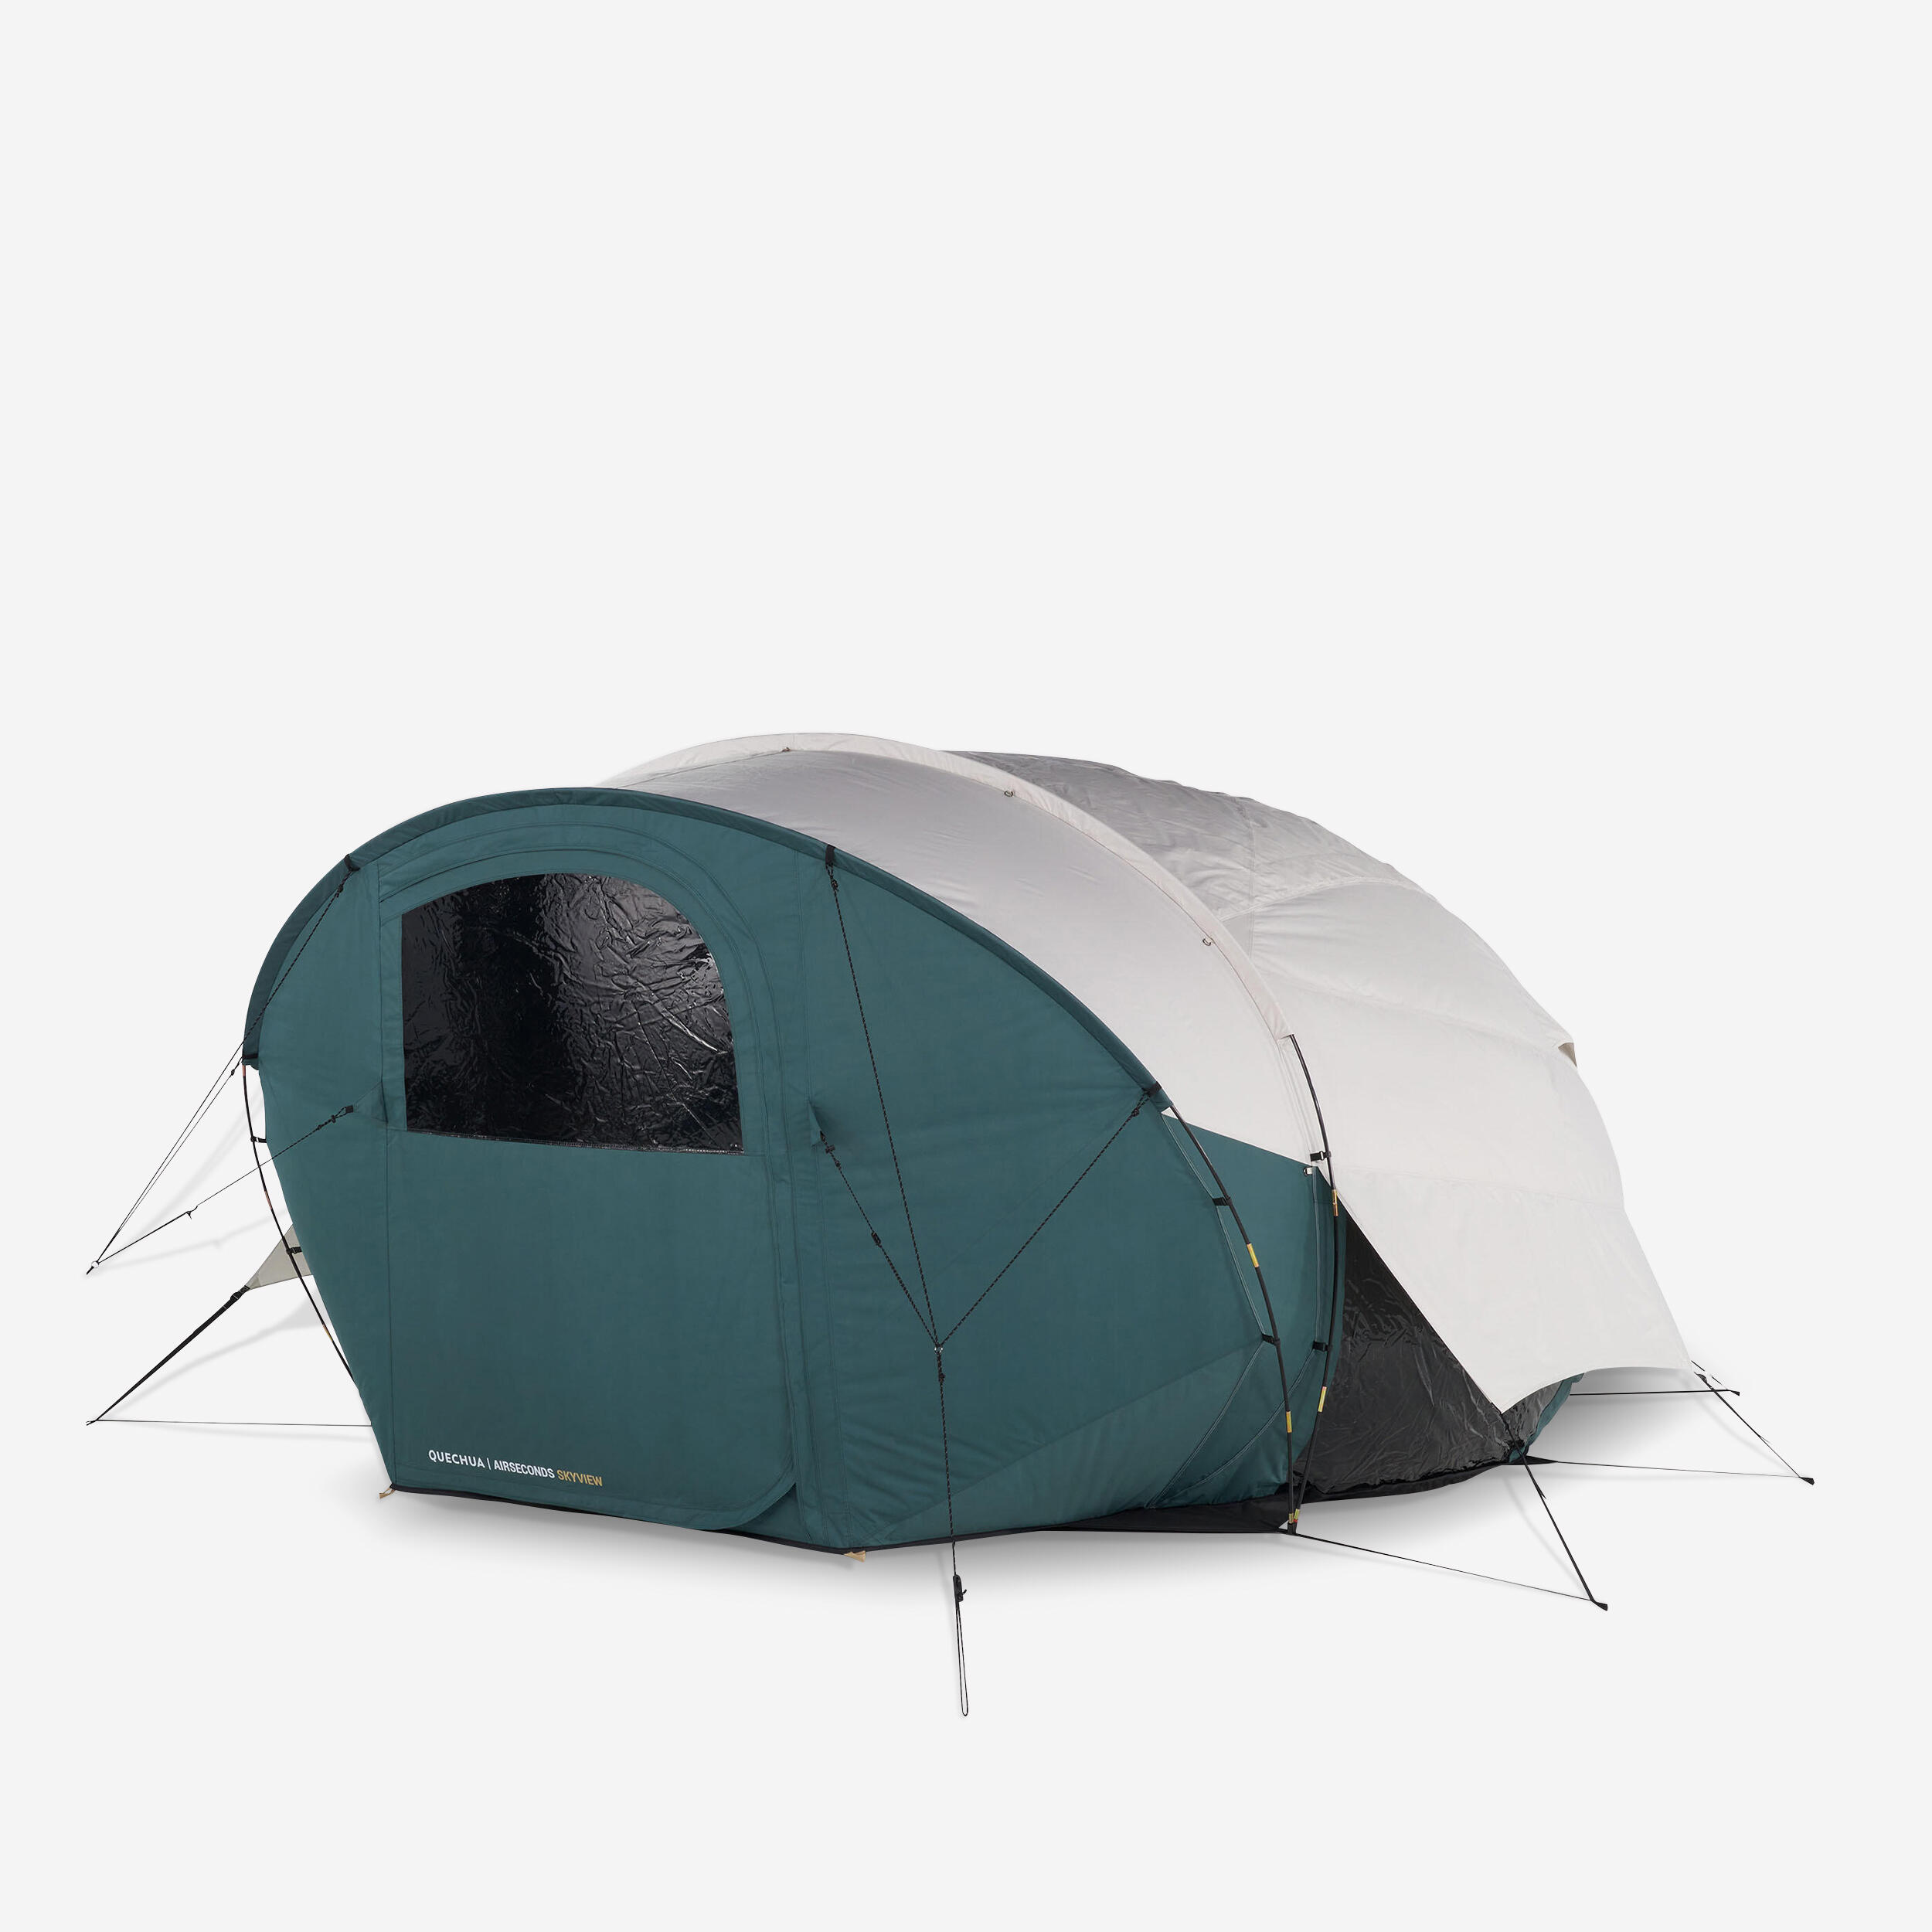 QUECHUA Camping Bubble Tent - AirSeconds Skyview Polycotton - 2 man - 1 Bedroom